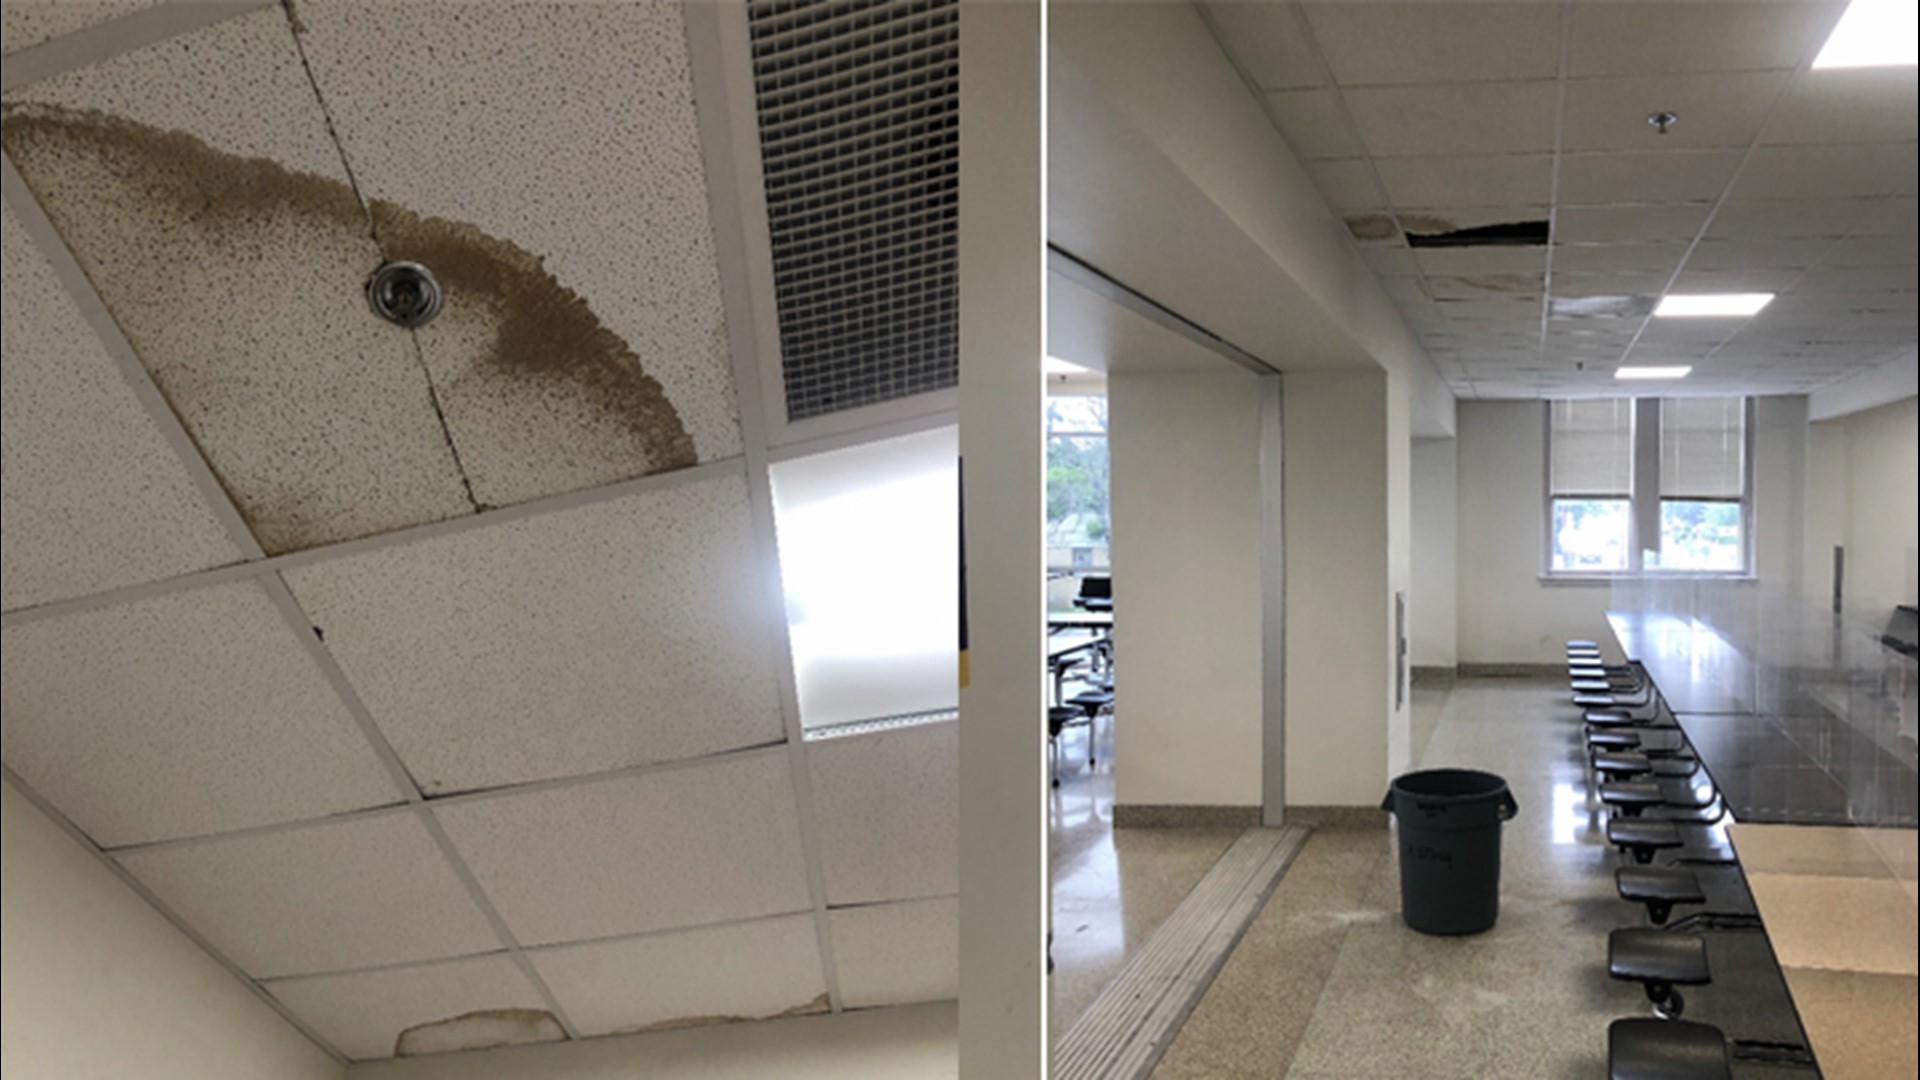 The school reopened in January 2020 with $52 million top-to-bottom renovations. But now the community is asking for answers as to why the ceilings are leaking.